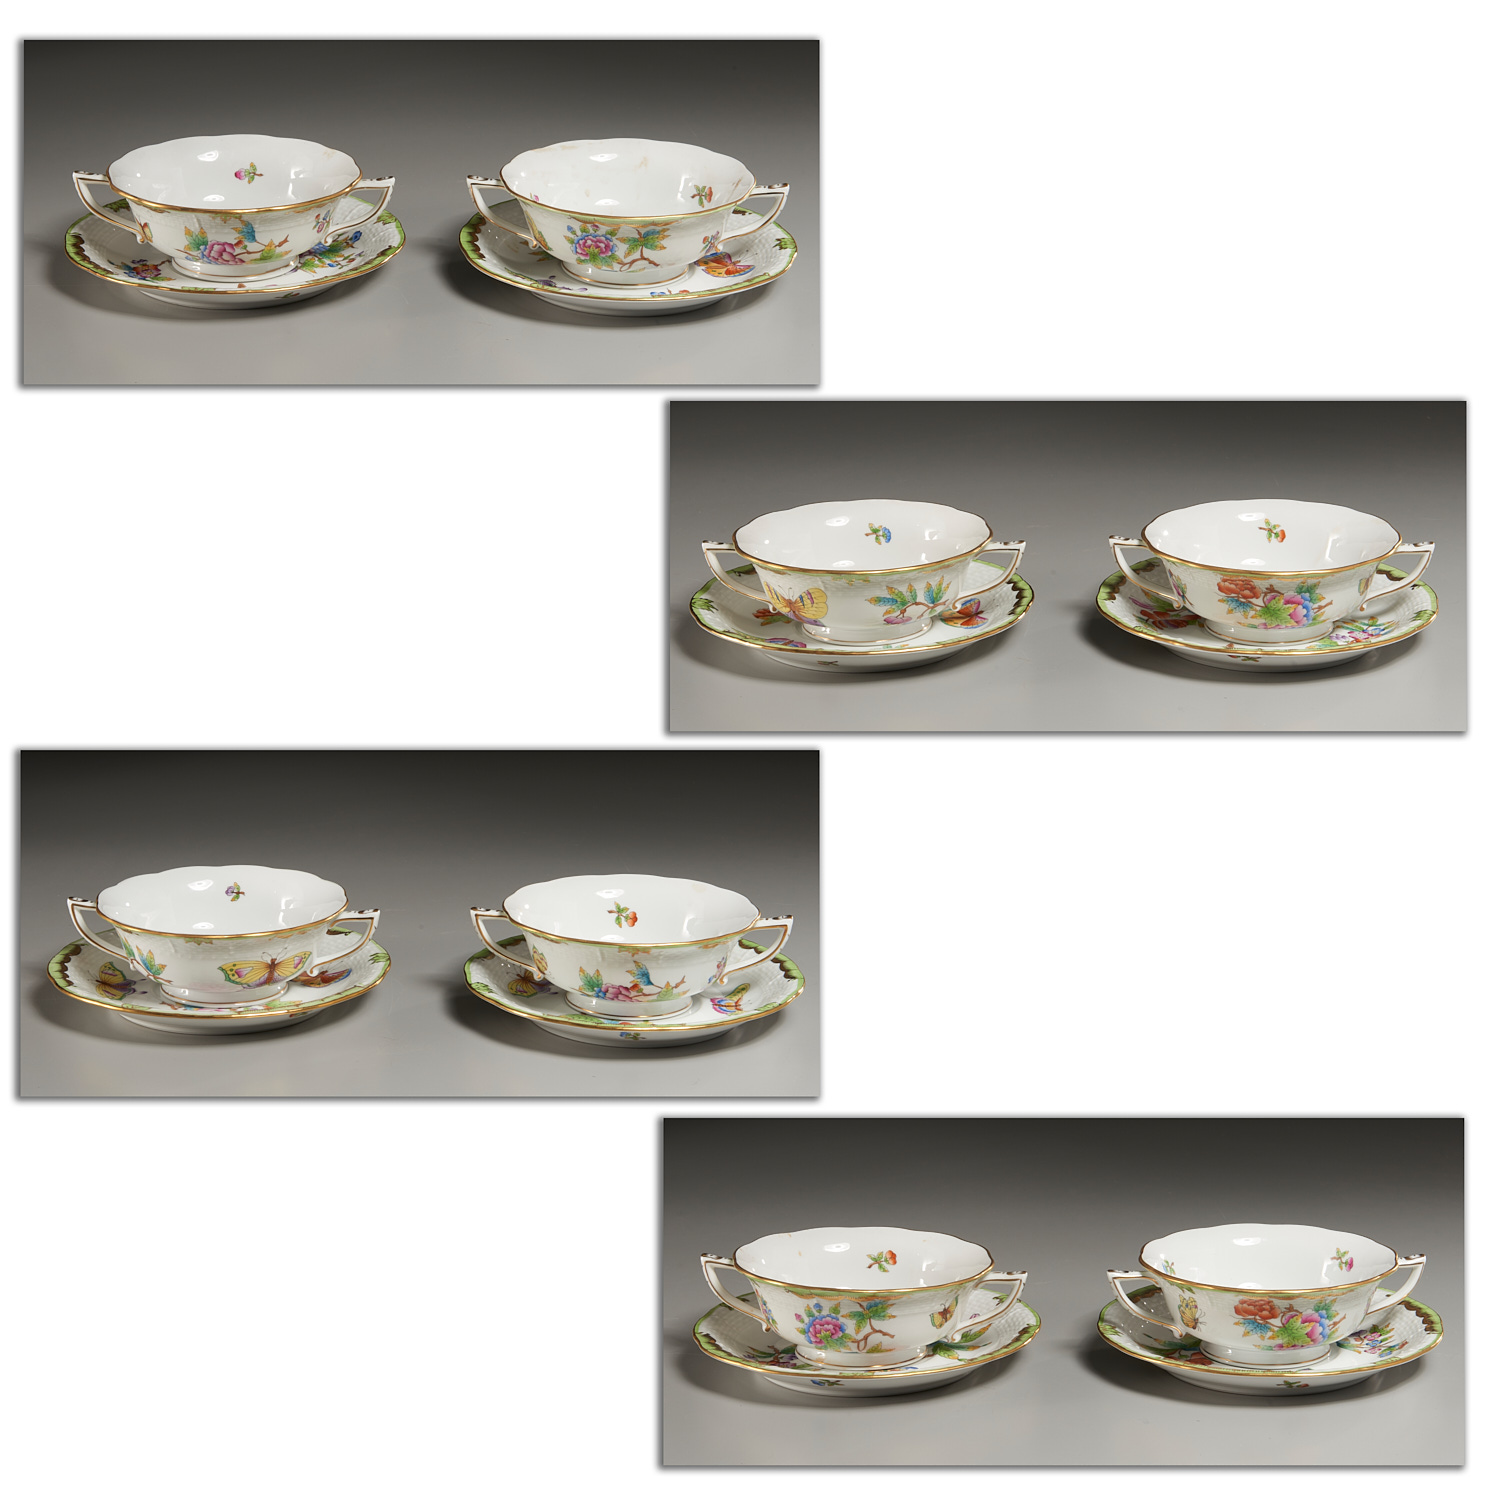  8 HEREND PORCELAIN SOUP CUPS 362399